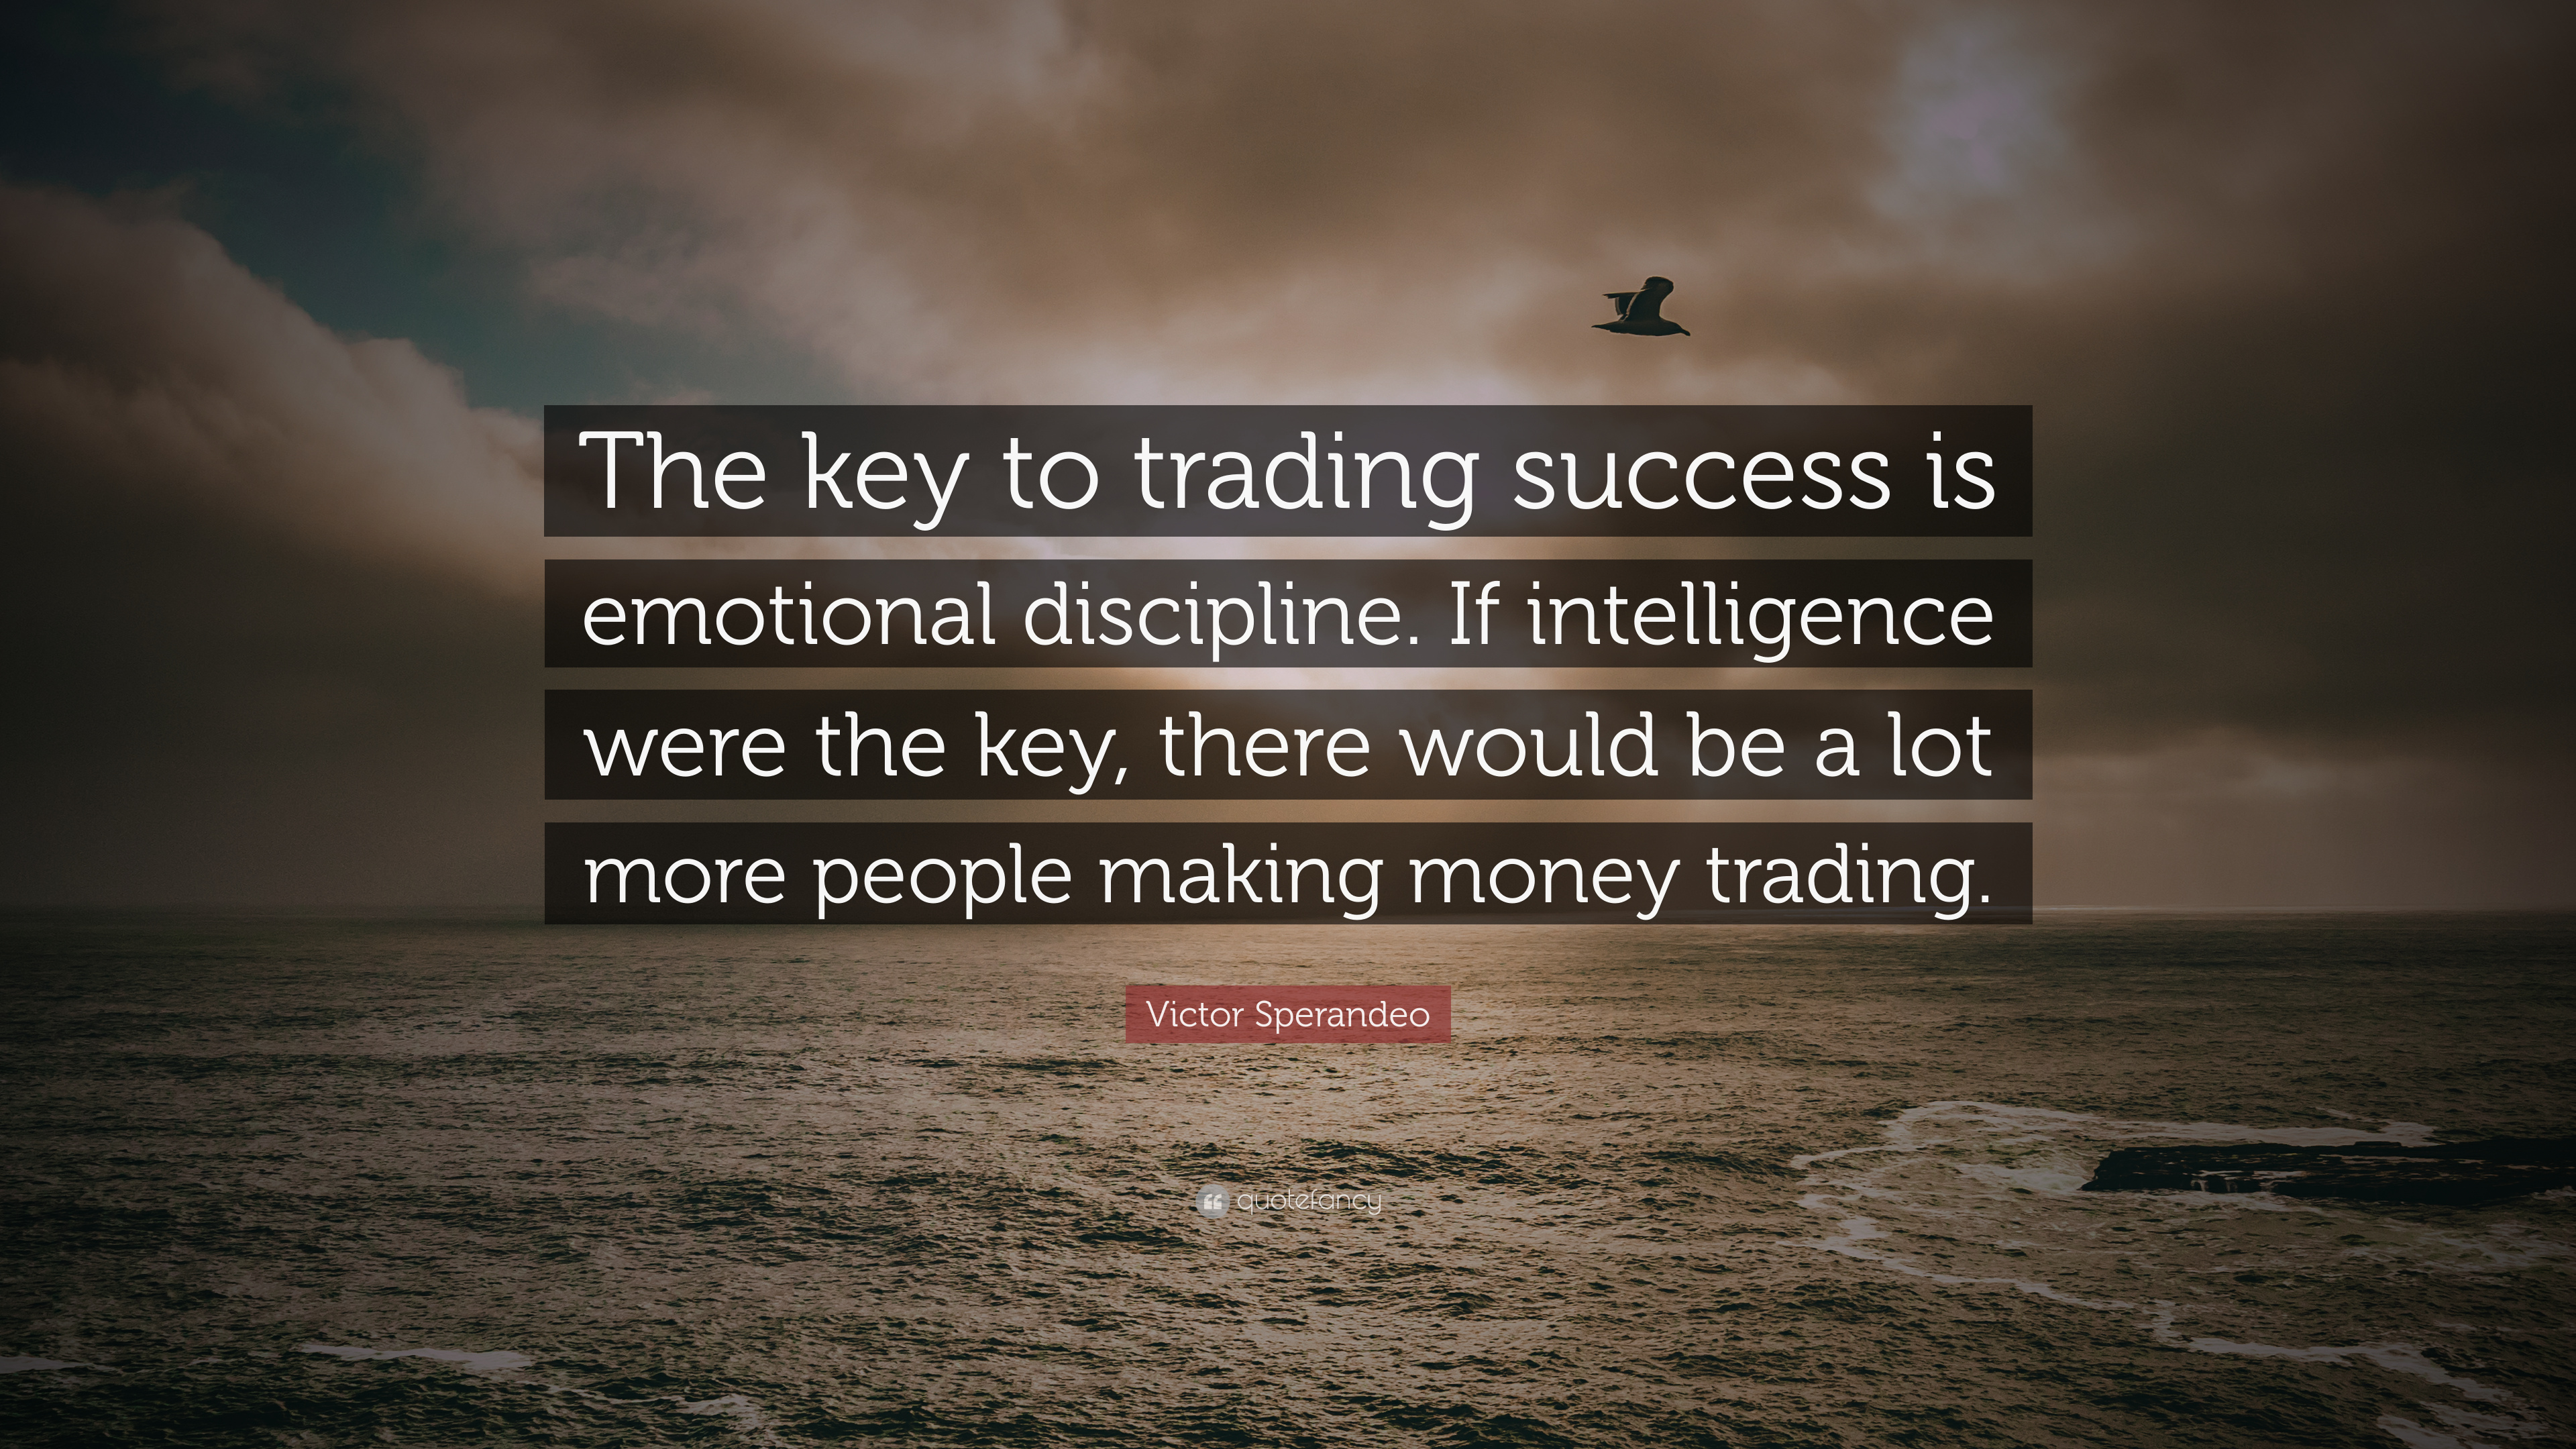 Victor Sperandeo Quote: “The key to trading success is emotional discipline. If intelligence were the key, there would be a lot more people makin.”